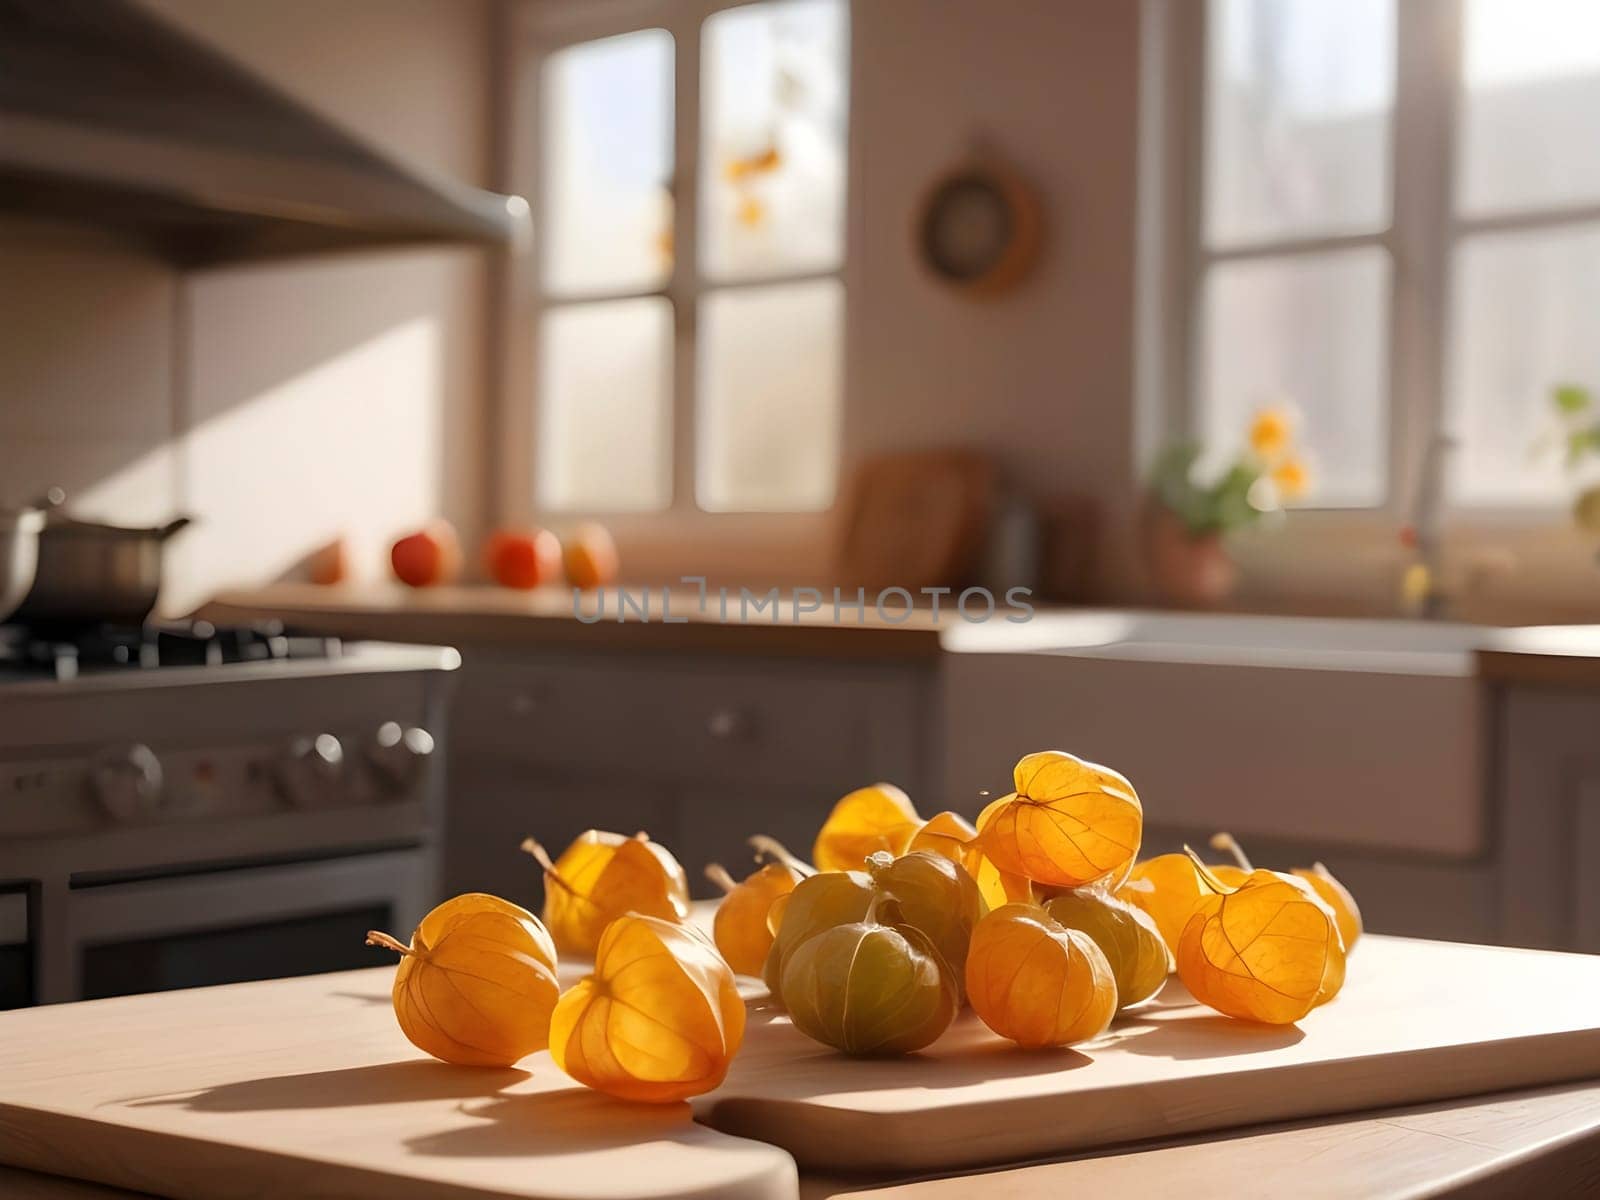 Culinary Still Life: Physalis in the Afternoon Light on a Wooden Surface by mailos